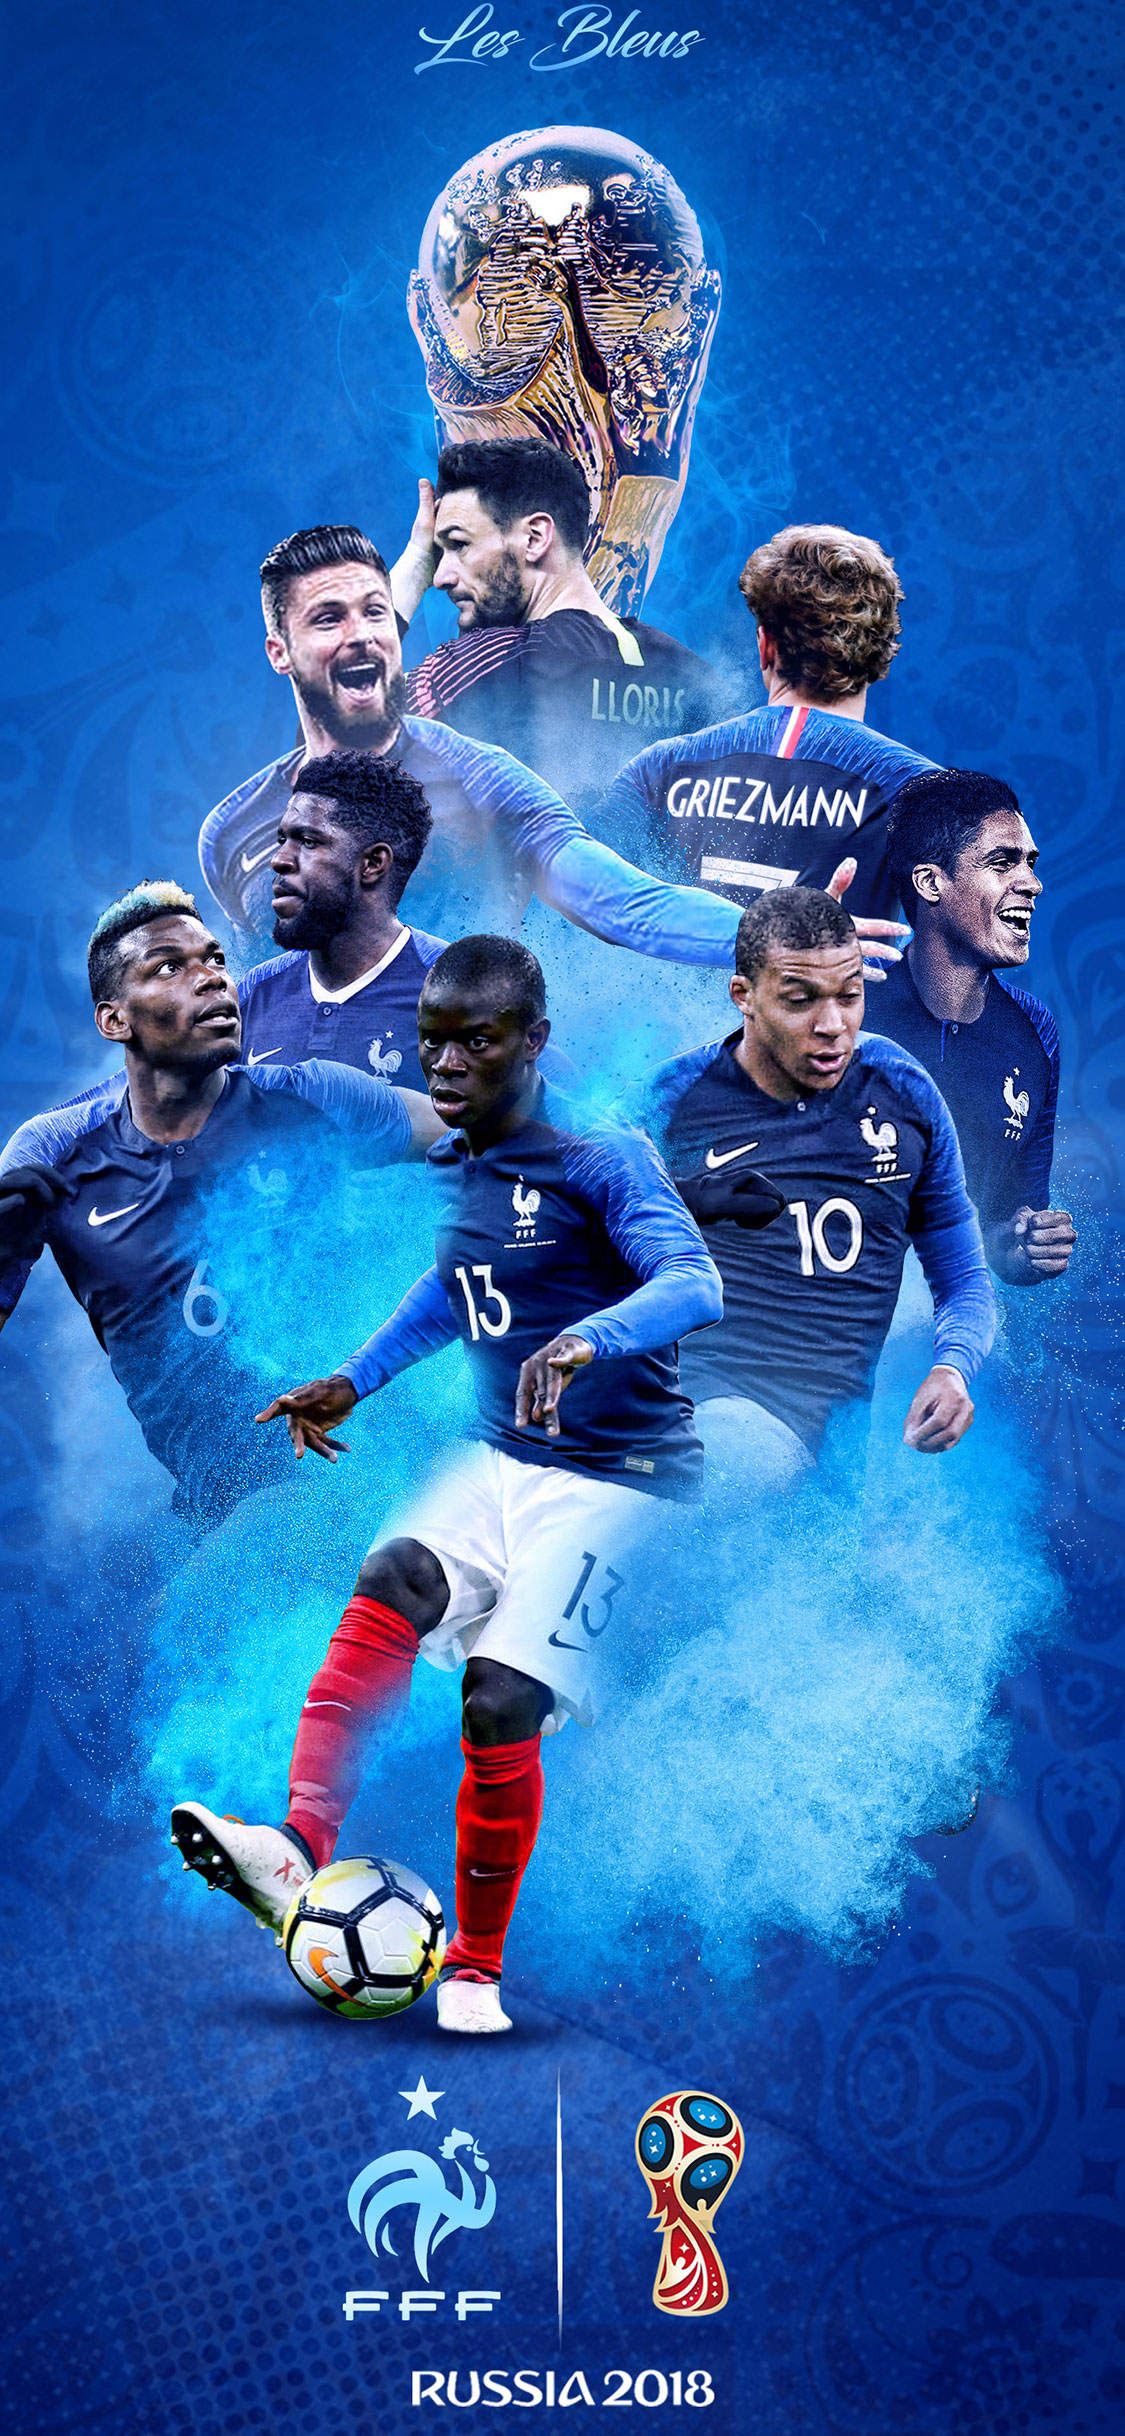 FIFA World Cup Wallpaper for iPhone Pro Max, X, 6